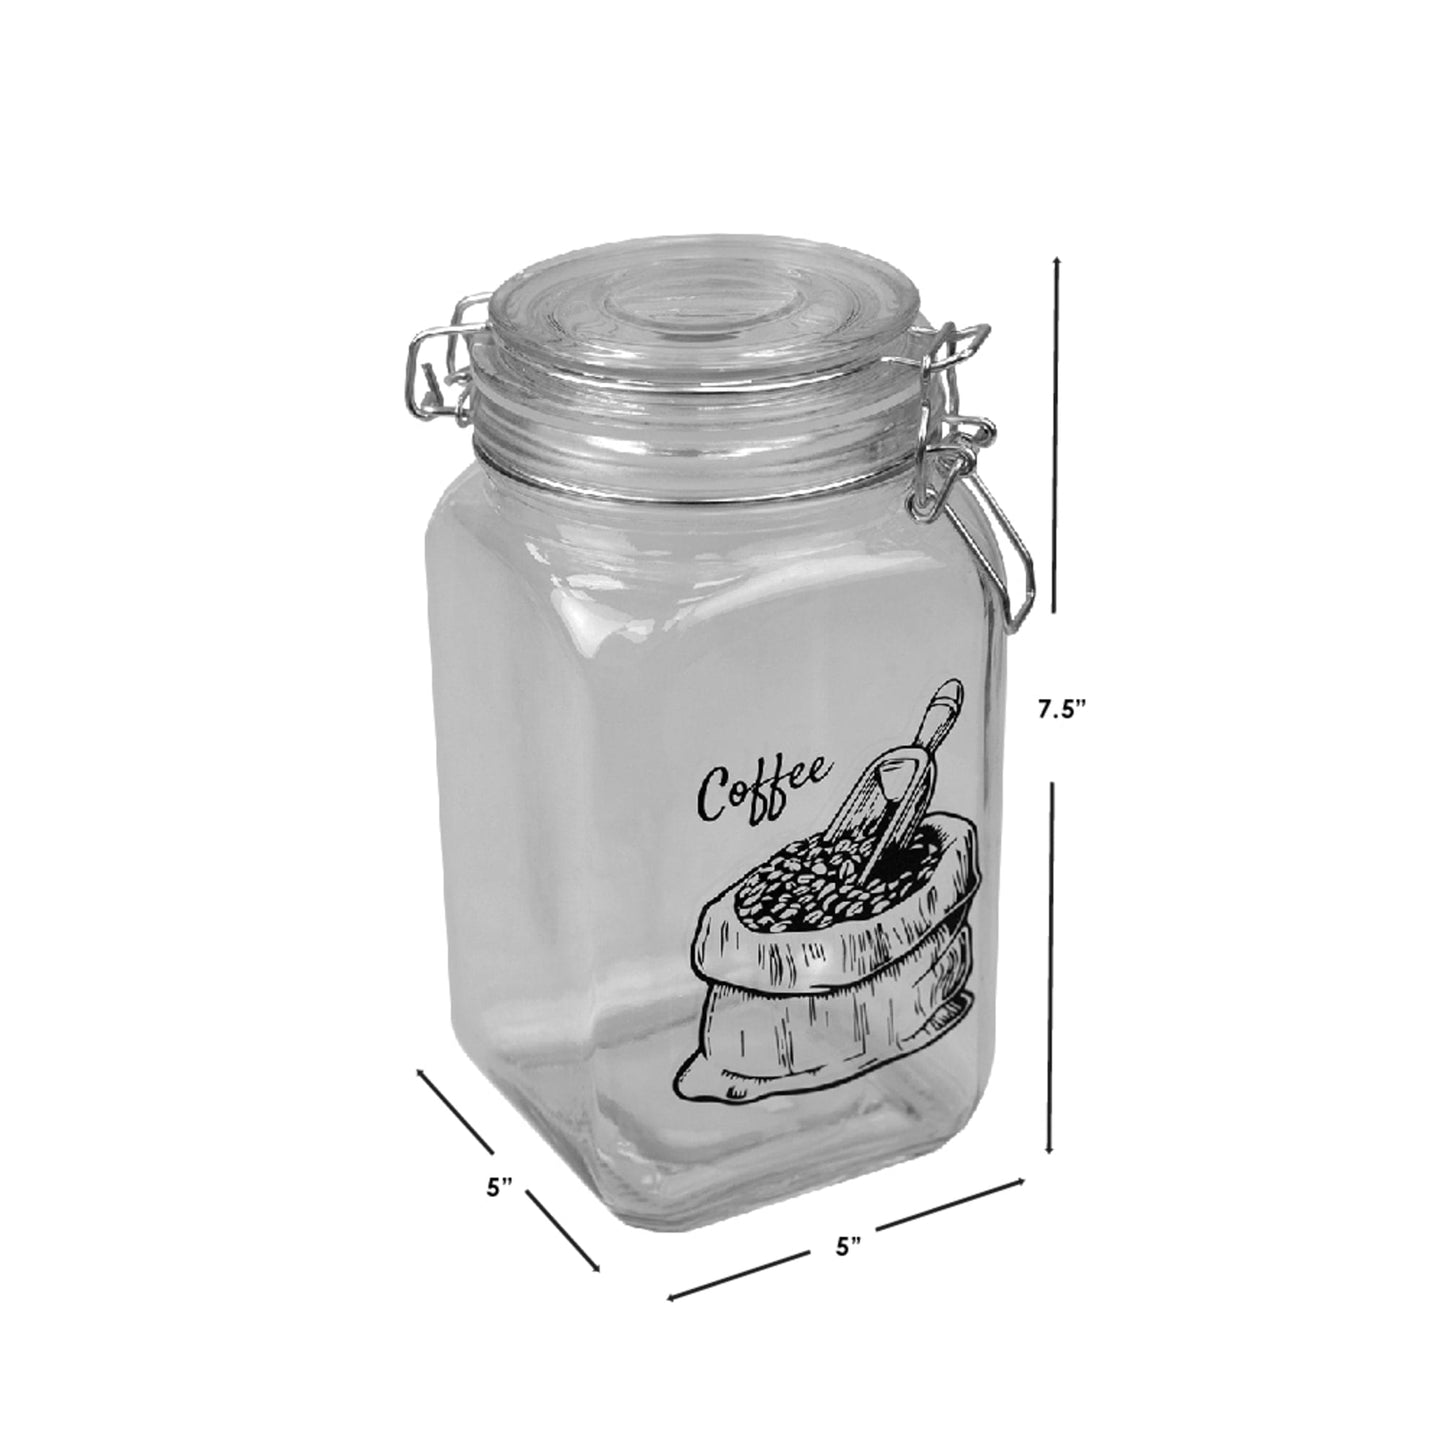 Ludlow 43 oz. Glass Canister with Metal Clasp, Clear